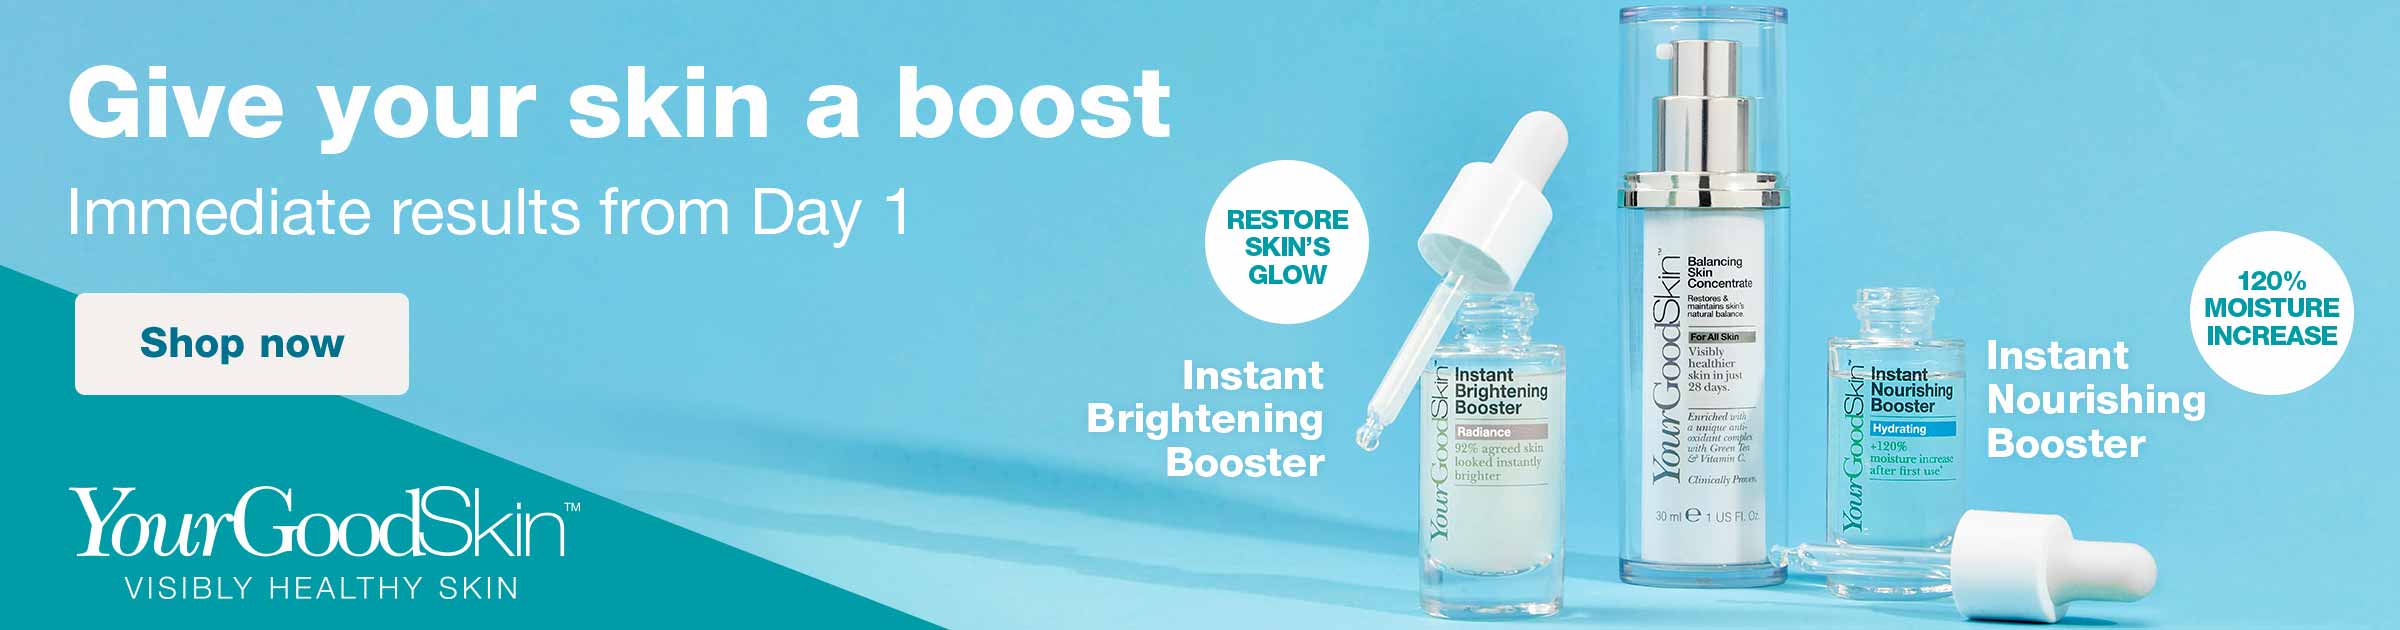 YourGoodSkin(TM). Visibly Healthy Skin. Give your skin a boost. Immediate results from Day 1. Restore skin's glow. Instant Brightening Booster. Instant Nourishing Booster. 120% moisture increase. Shop now.